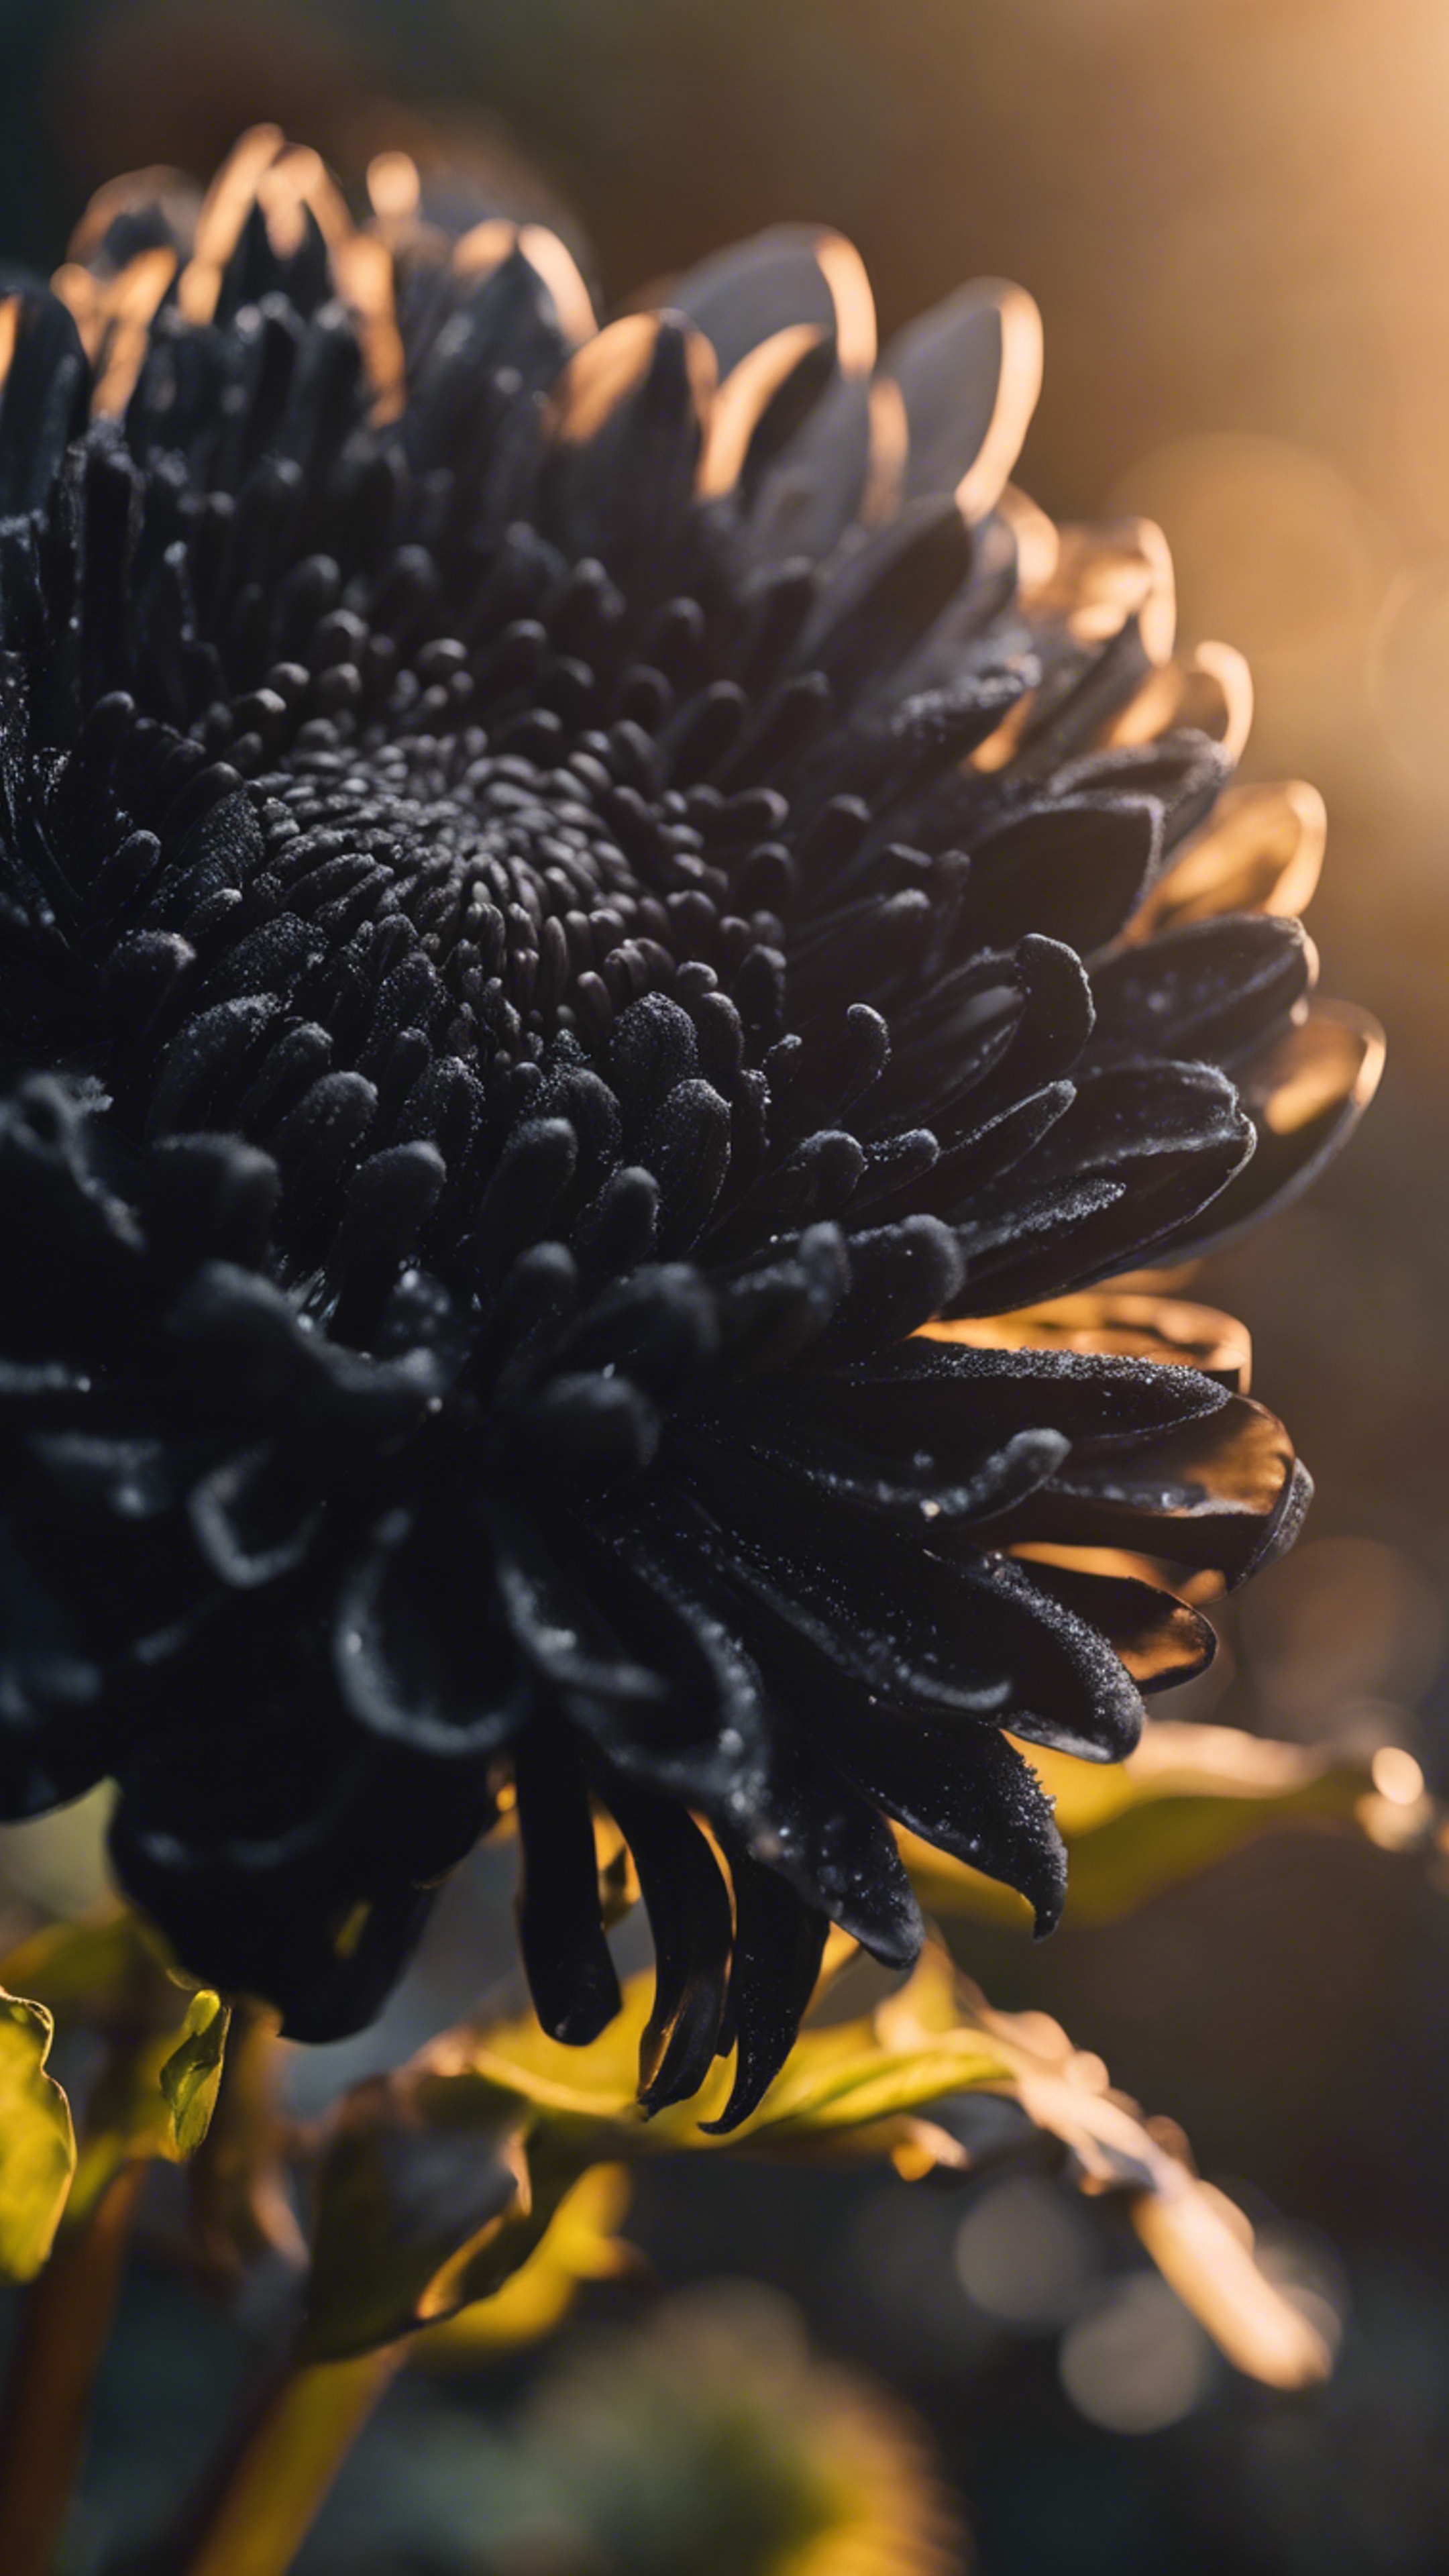 An ethereal black chrysanthemum with intricate petals against a backdrop of the setting sun. Tapeta[4b40c3df292a42548d77]